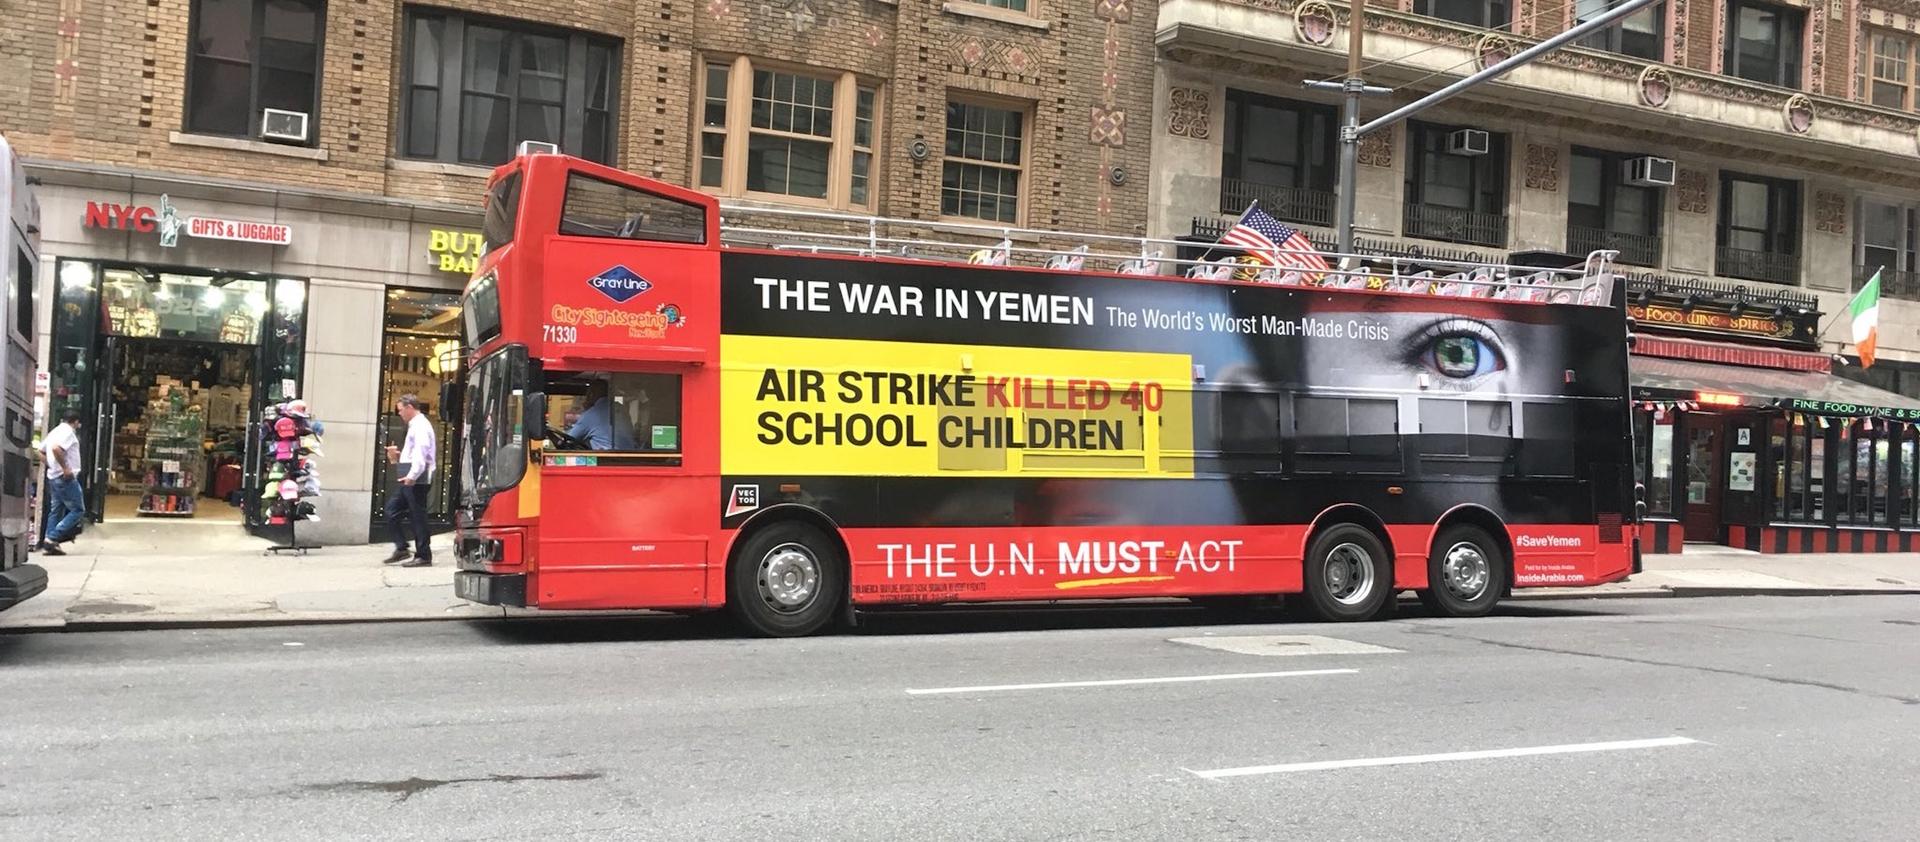 This bright red New York City tour bus carries a message about the war being fought in Yemen.